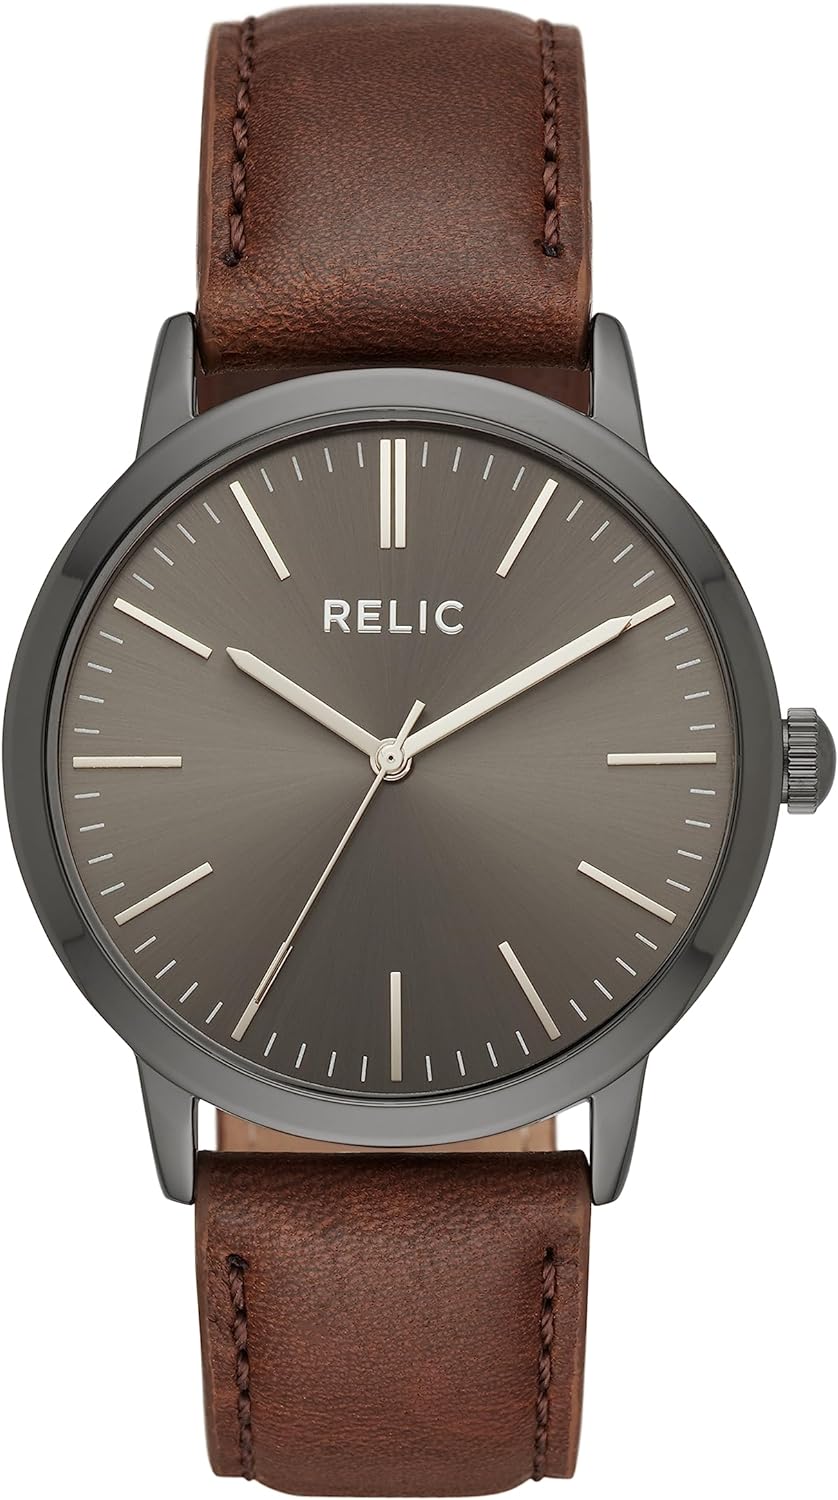 Relic Replacement Watch Bands